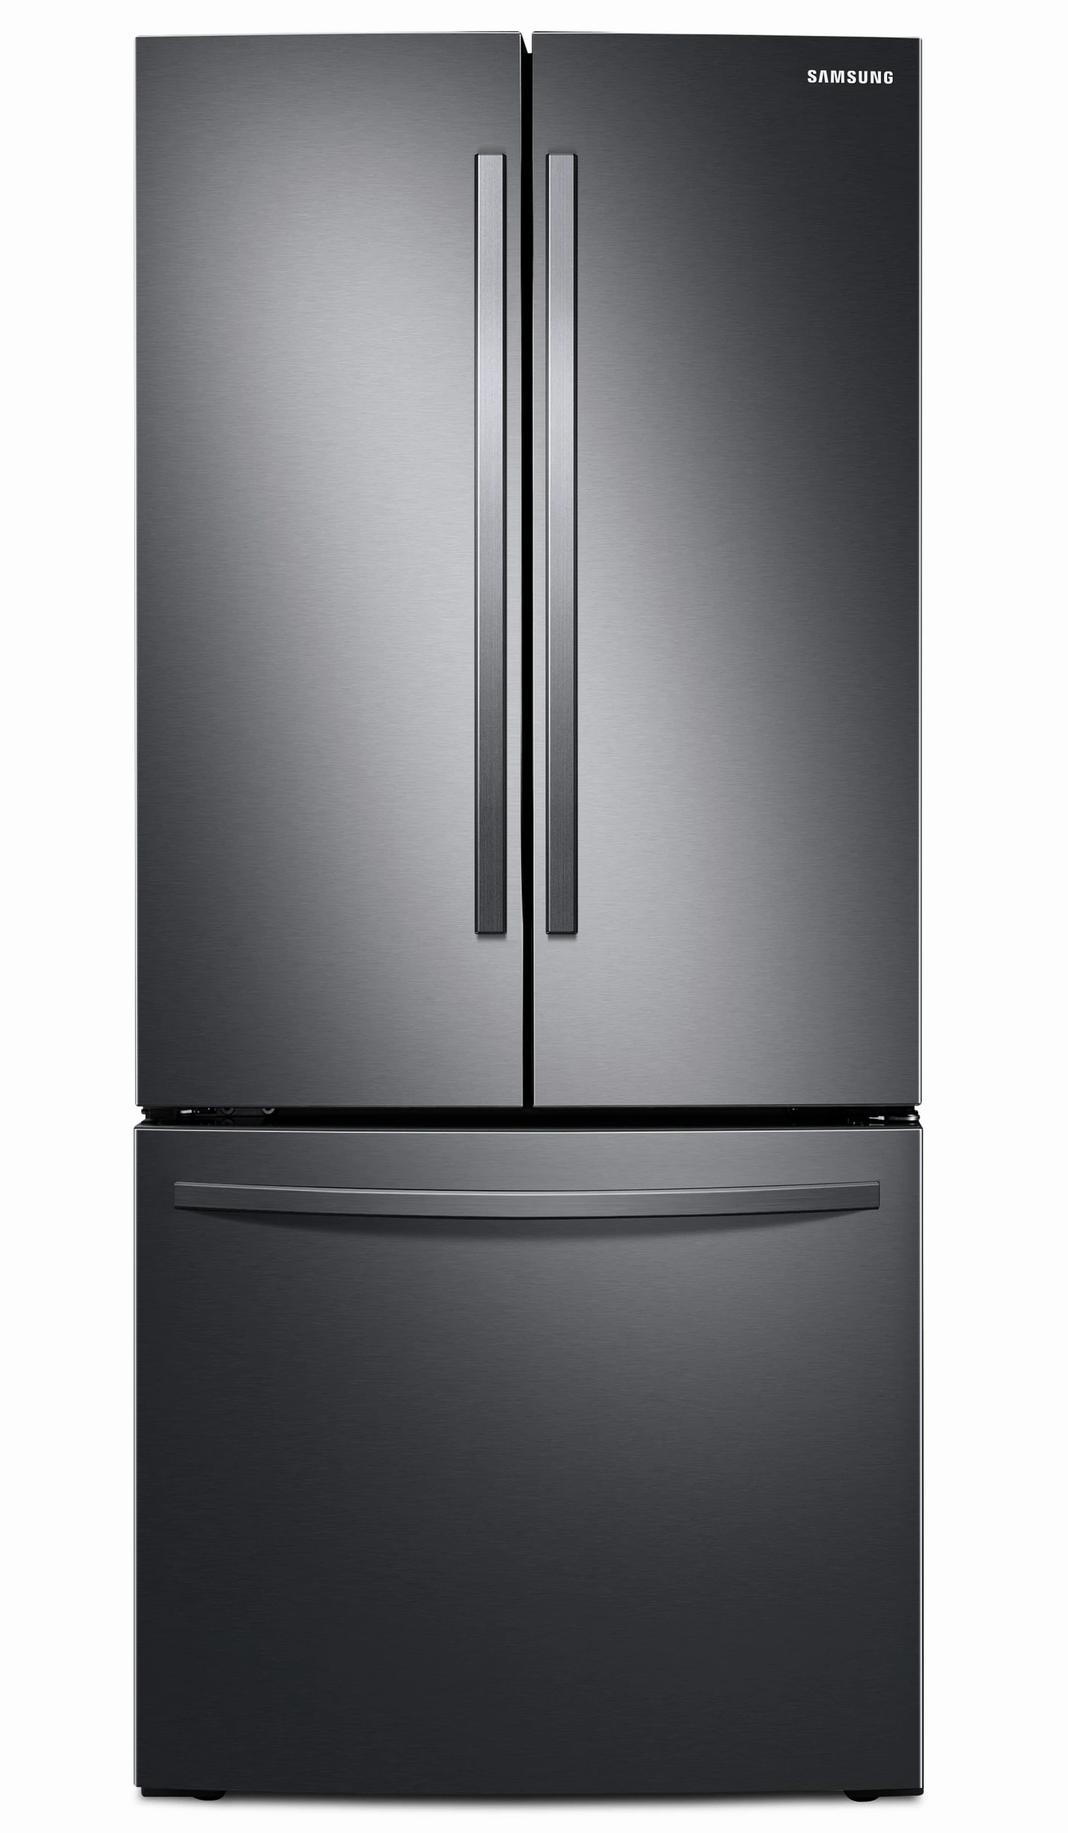 Samsung - 29.75 Inch 21.8 cu. ft French Door Refrigerator in Black Stainless - RF220NFTASG